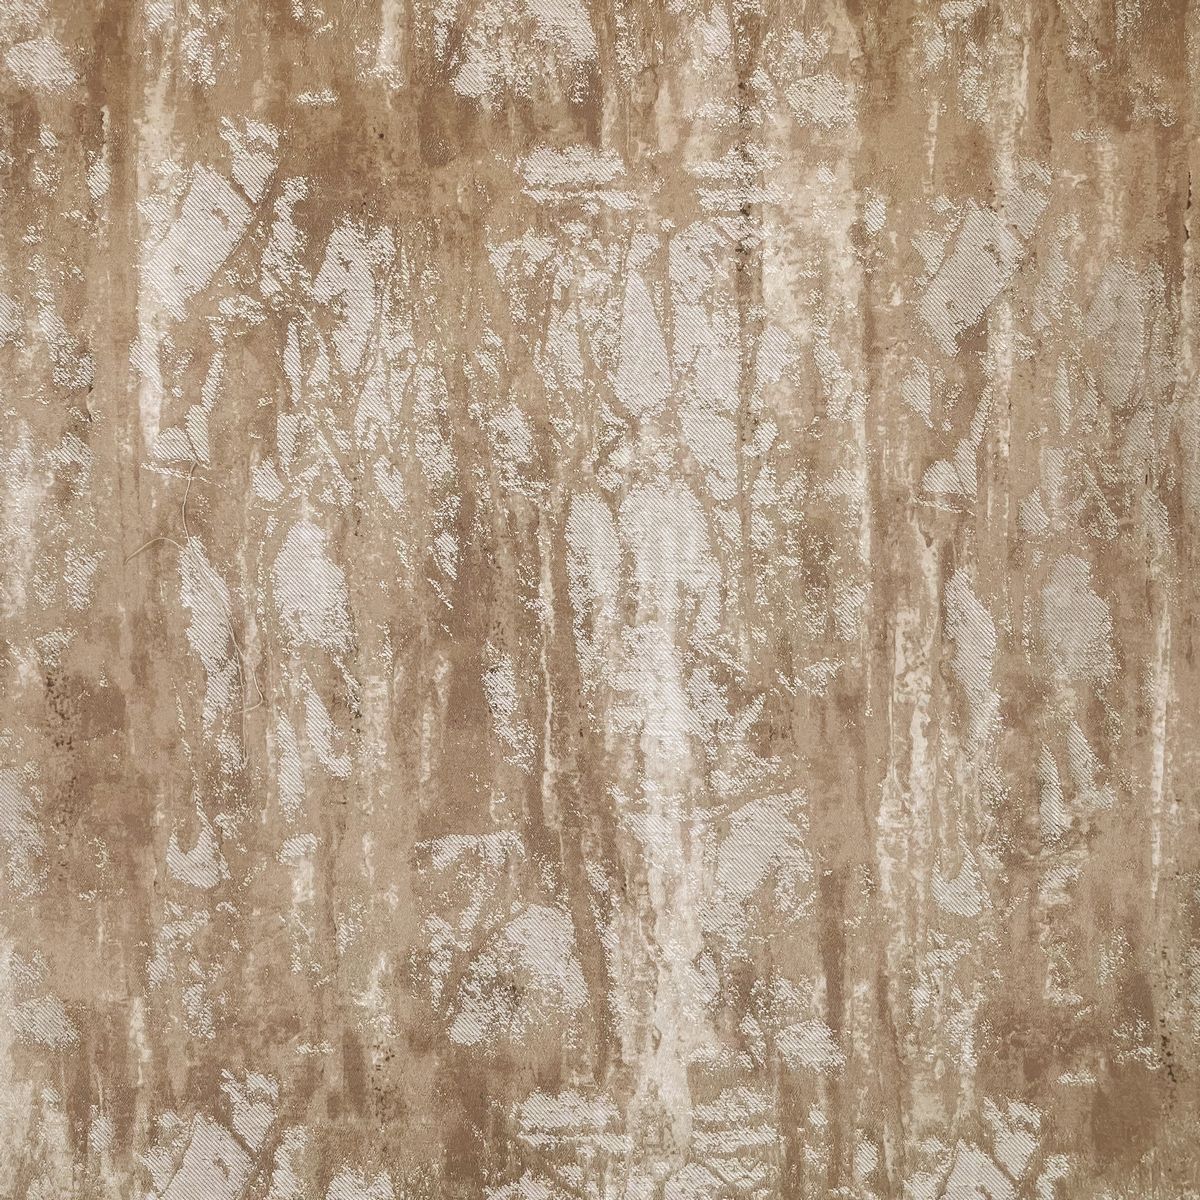 Wilderness Warm Taupe Fabric by Chatham Glyn